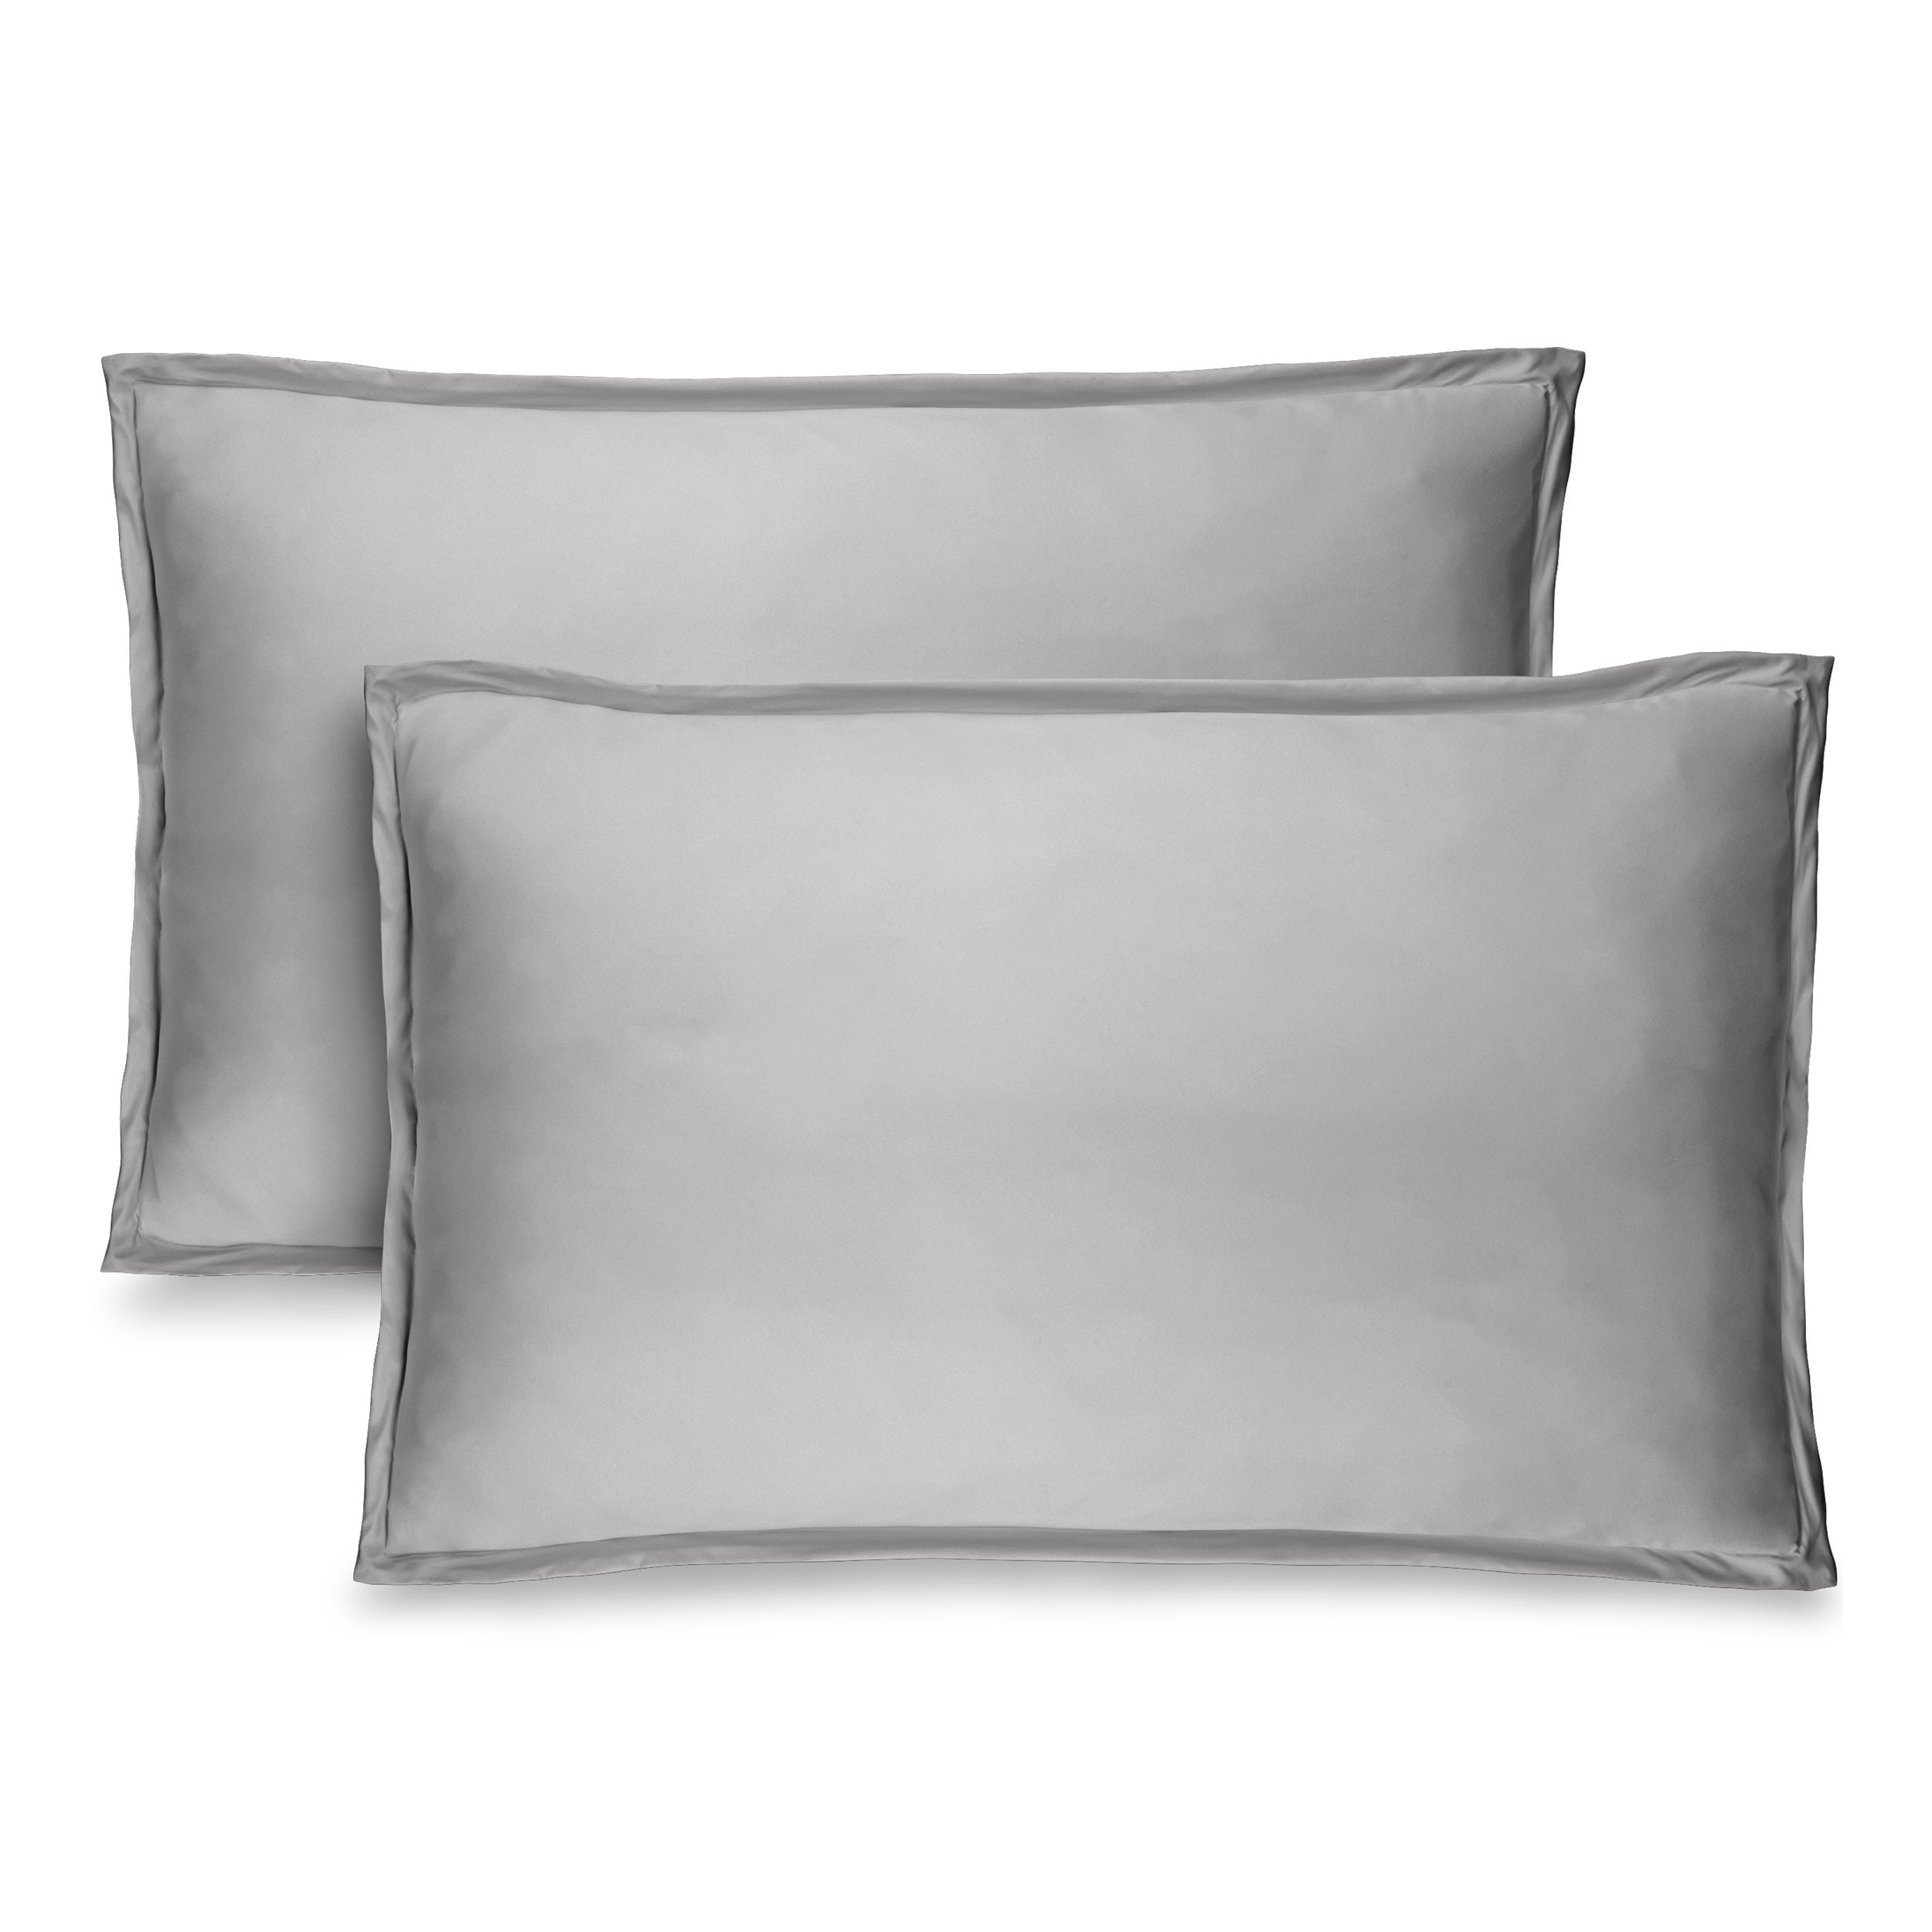 Two light grey pillow shams on pillows standing up with one behind the other